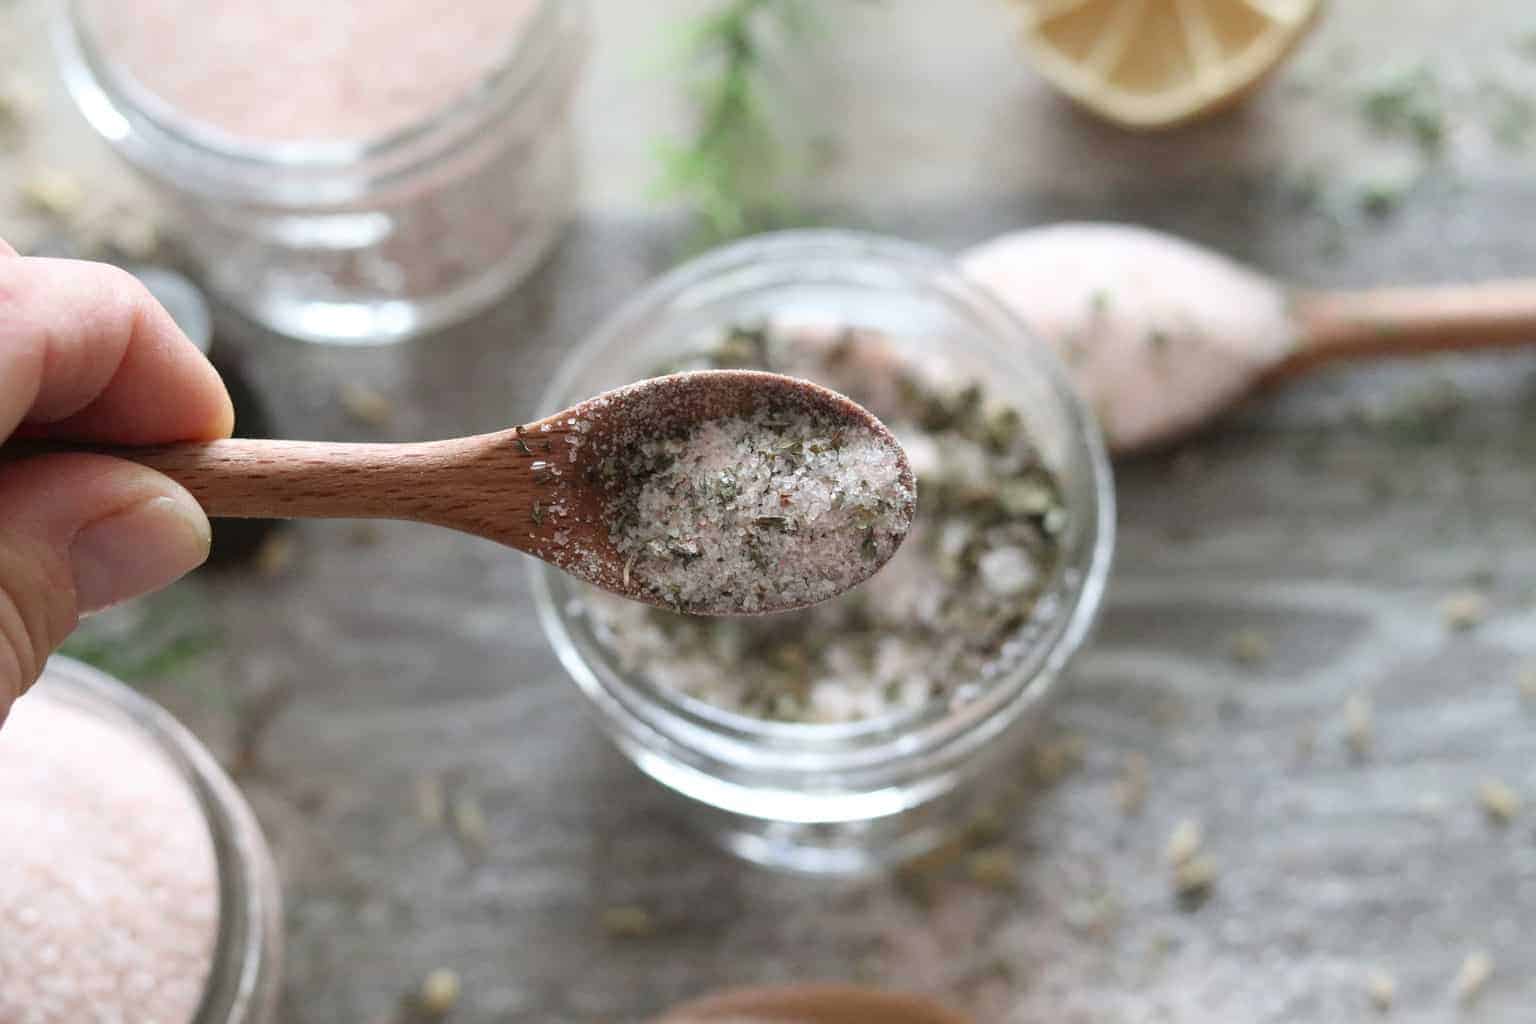 Seasoning in wooden spoon with ingredients in the background.